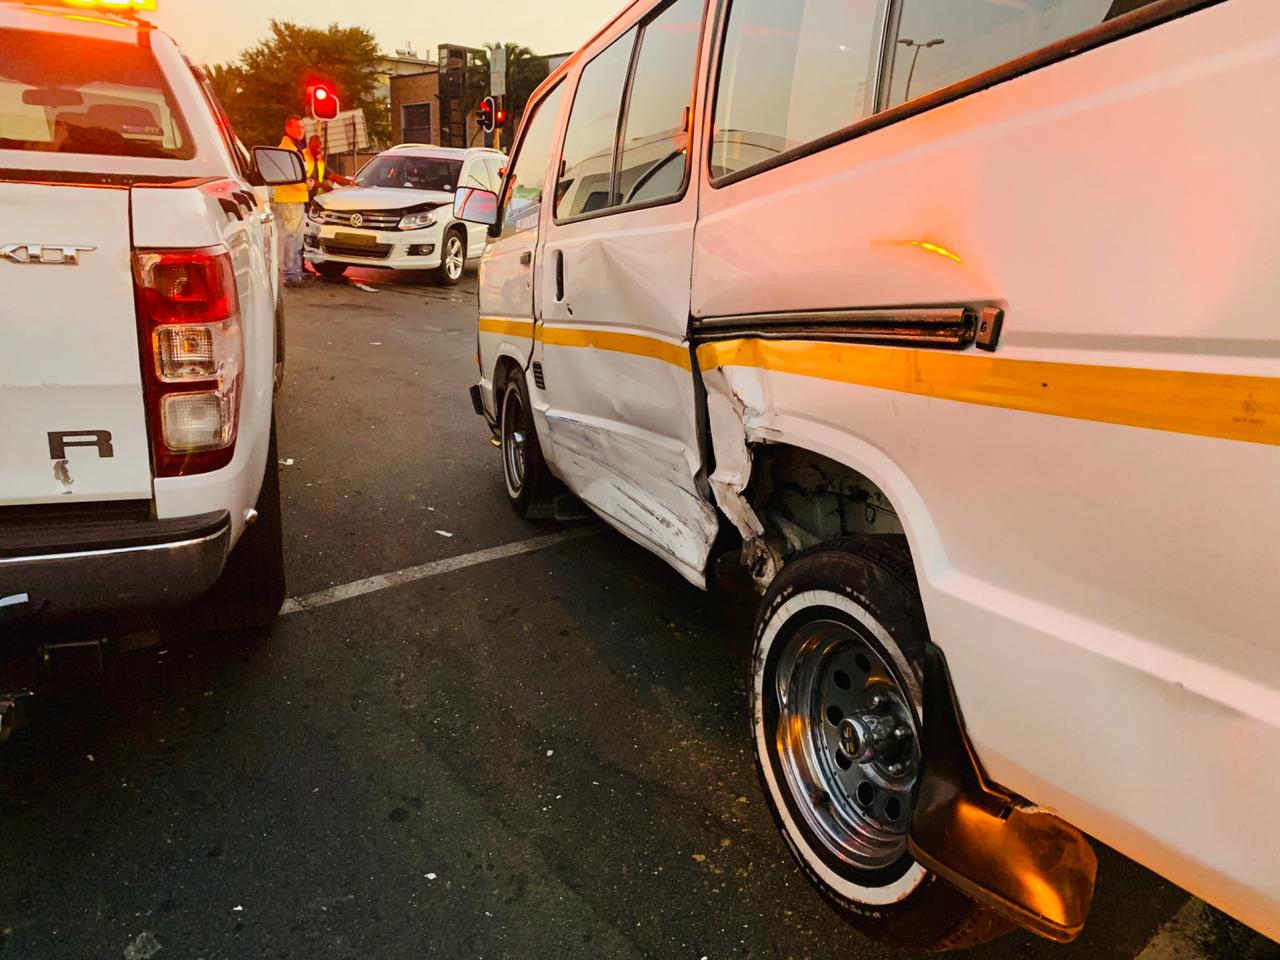 One person injured in collision at intersection in Edenburg, Johannesburg